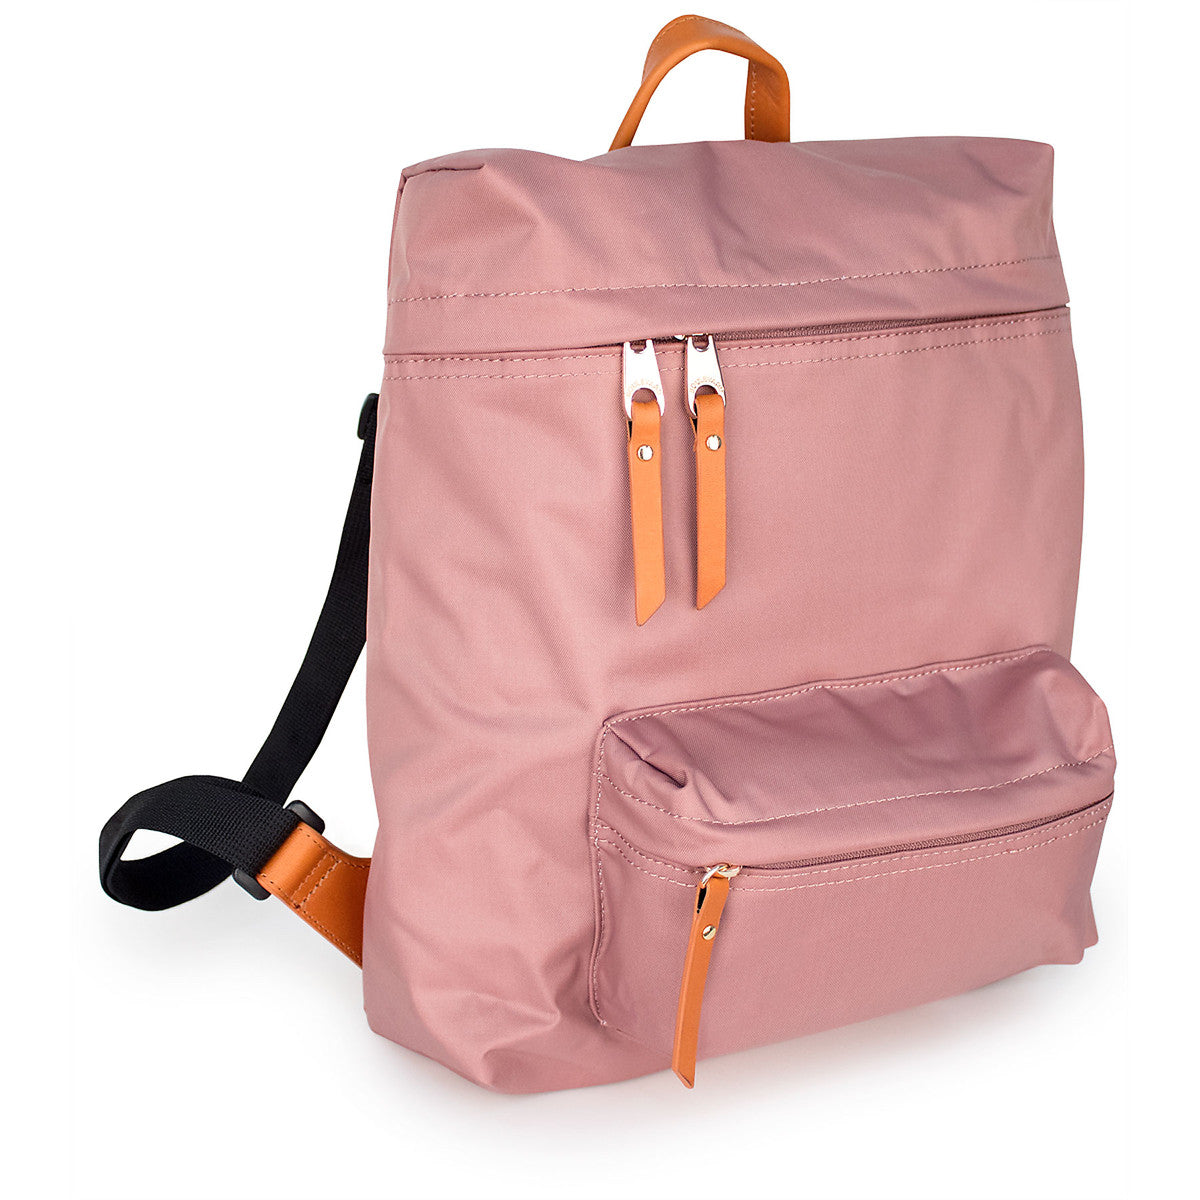 Hailey Backpack - Mauve (Ships in 1-2 Weeks)